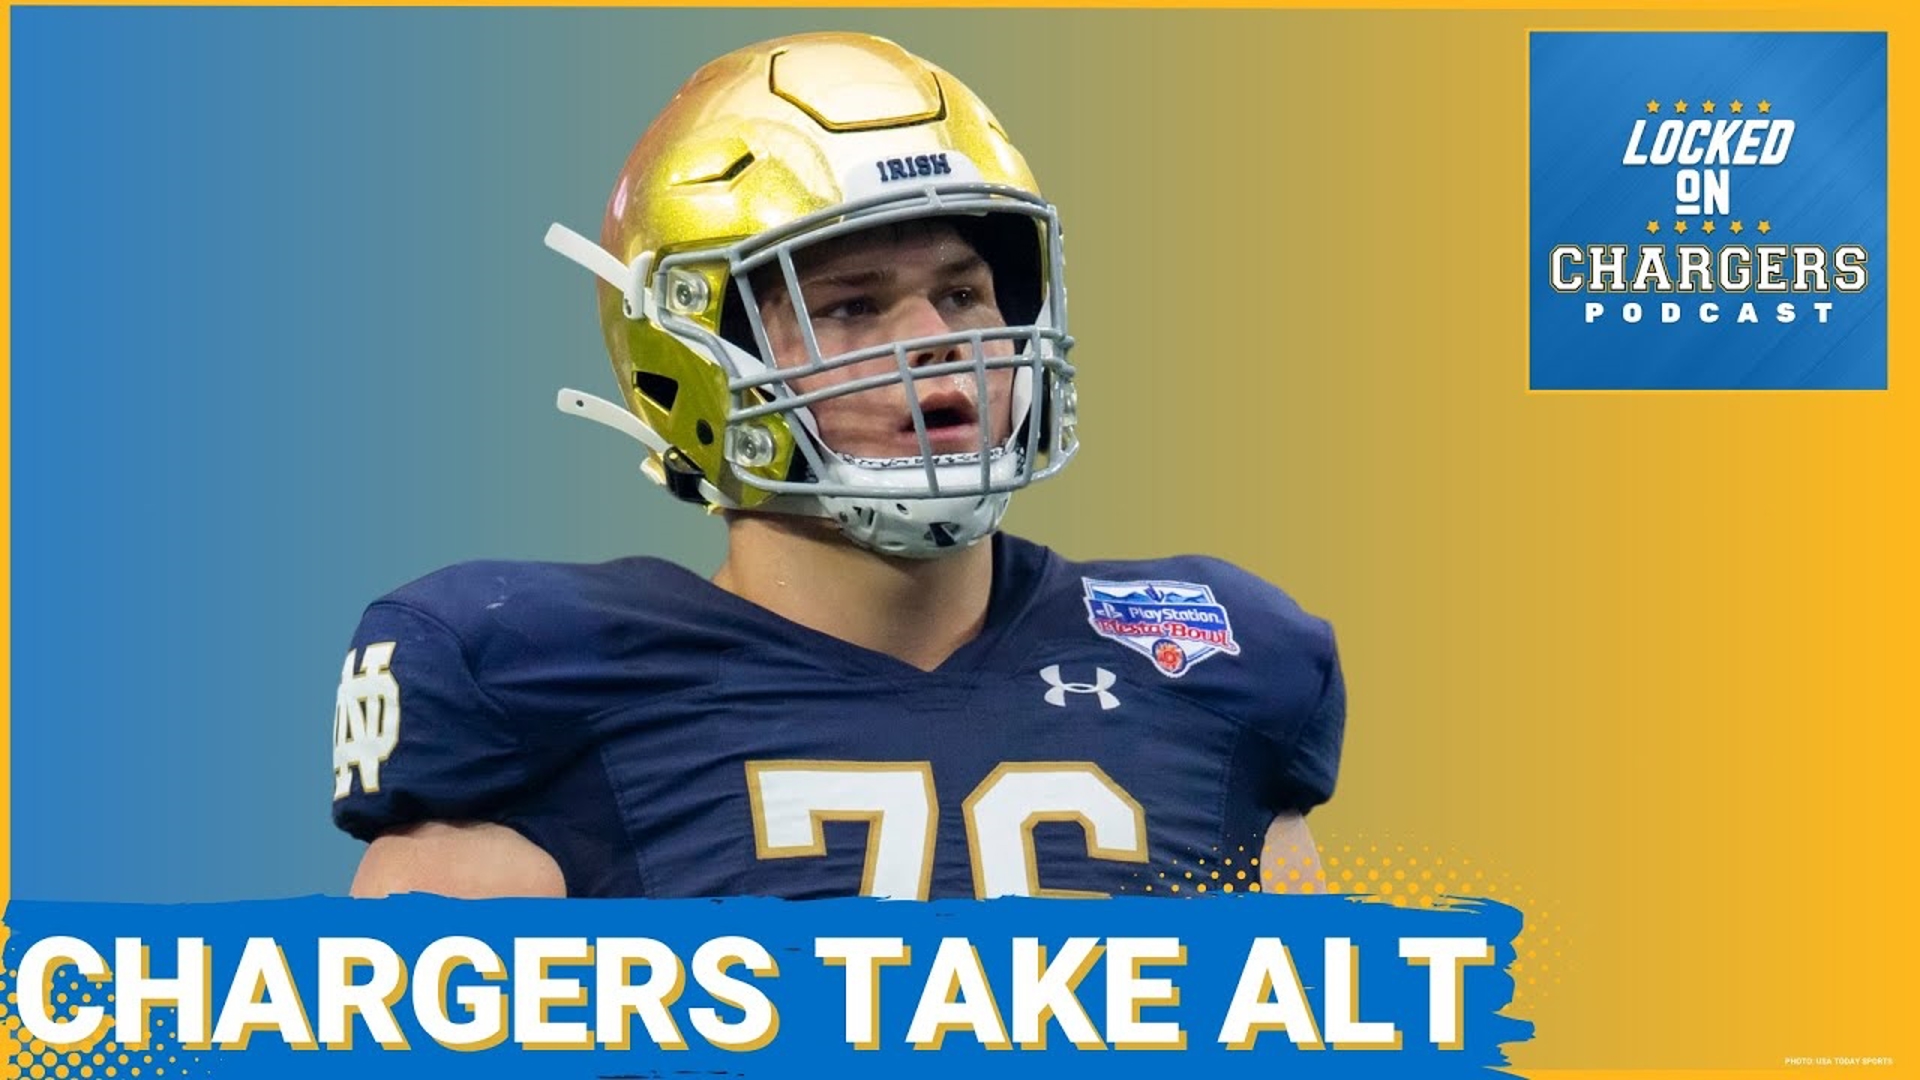 Jim Harbaugh and the new Chargers regime have preached building in the trenches and they backed that up taking the top offensive tackle in the class.